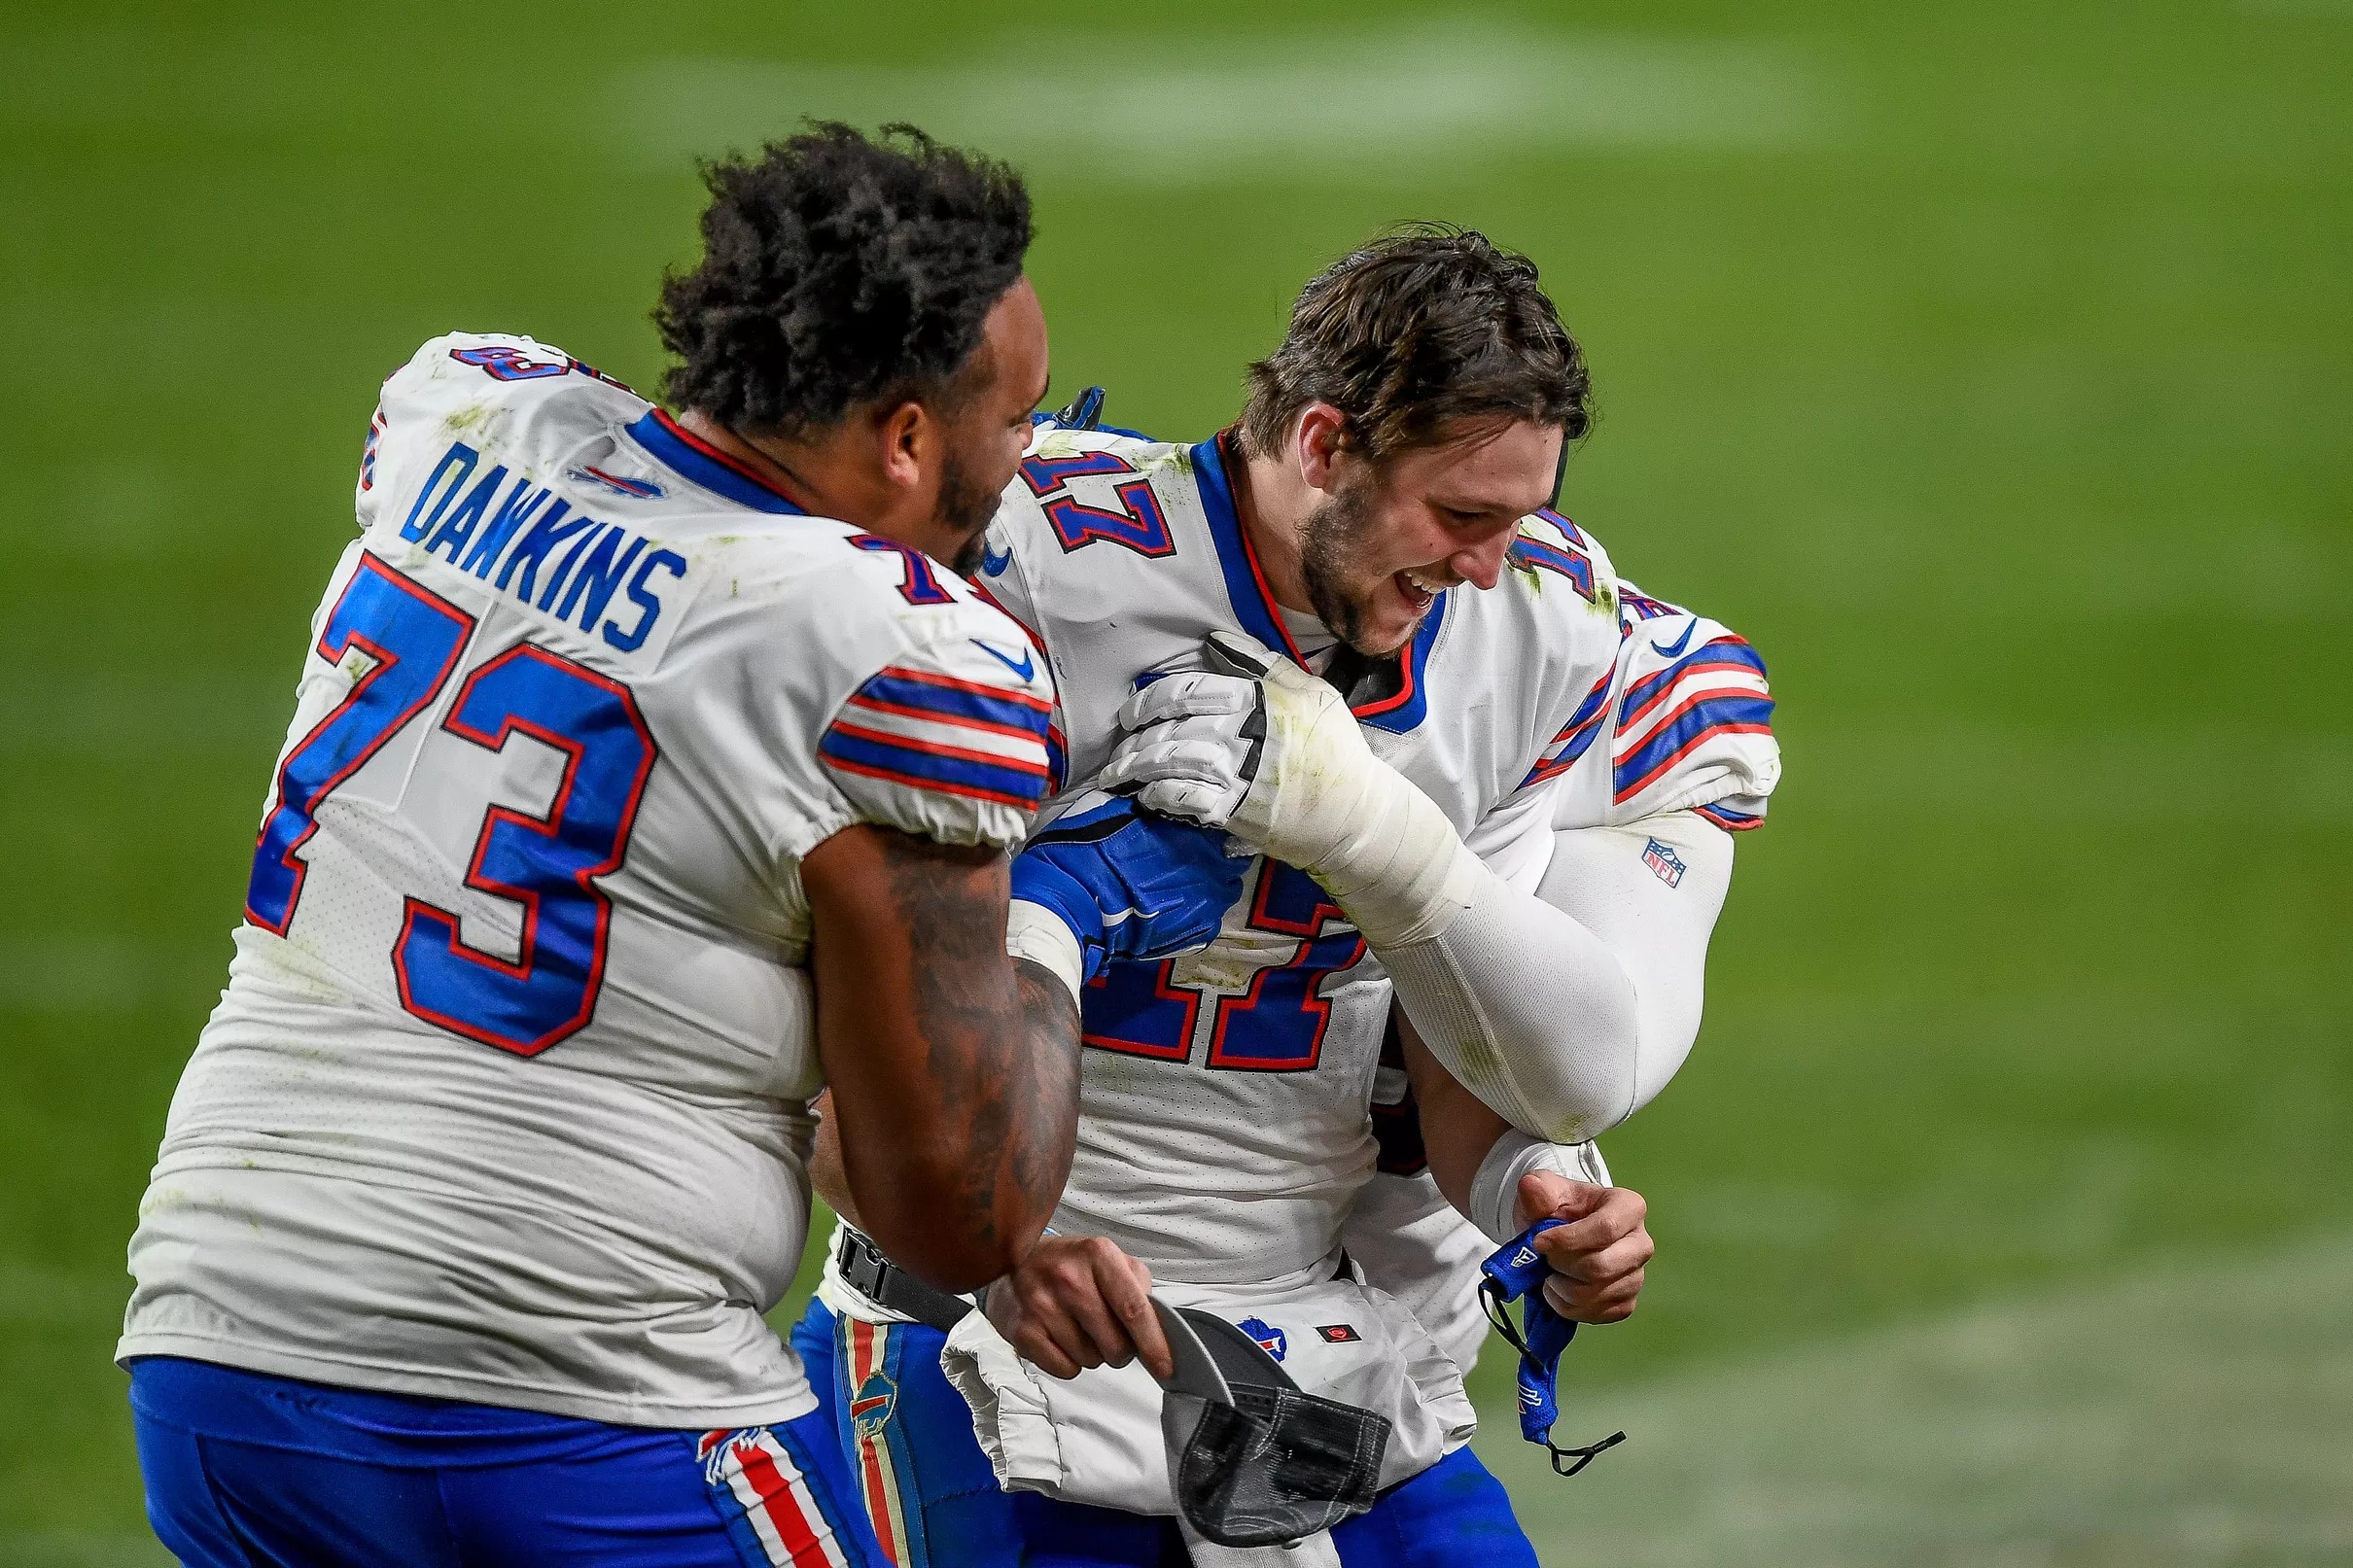 AFC Playoff Picture Buffalo Bills can clinch the two seed in Week 16